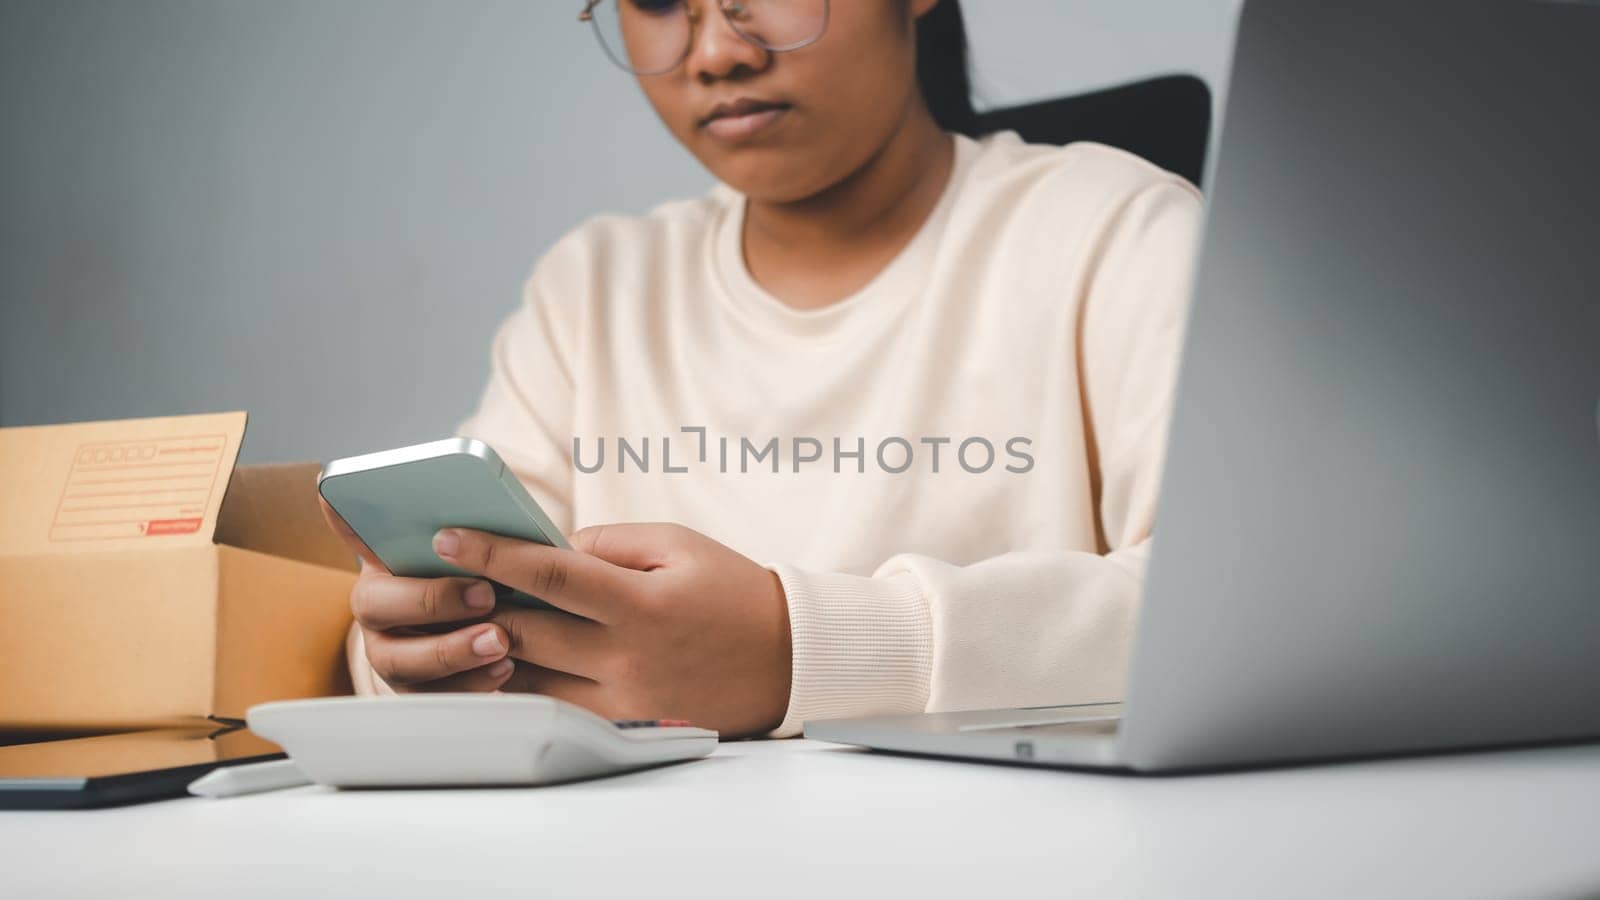 Woman runs an e-commerce business is checking orders from laptop, she owns an online store, she packs and ships through a private transport company. Online selling and online shopping concepts. by Unimages2527